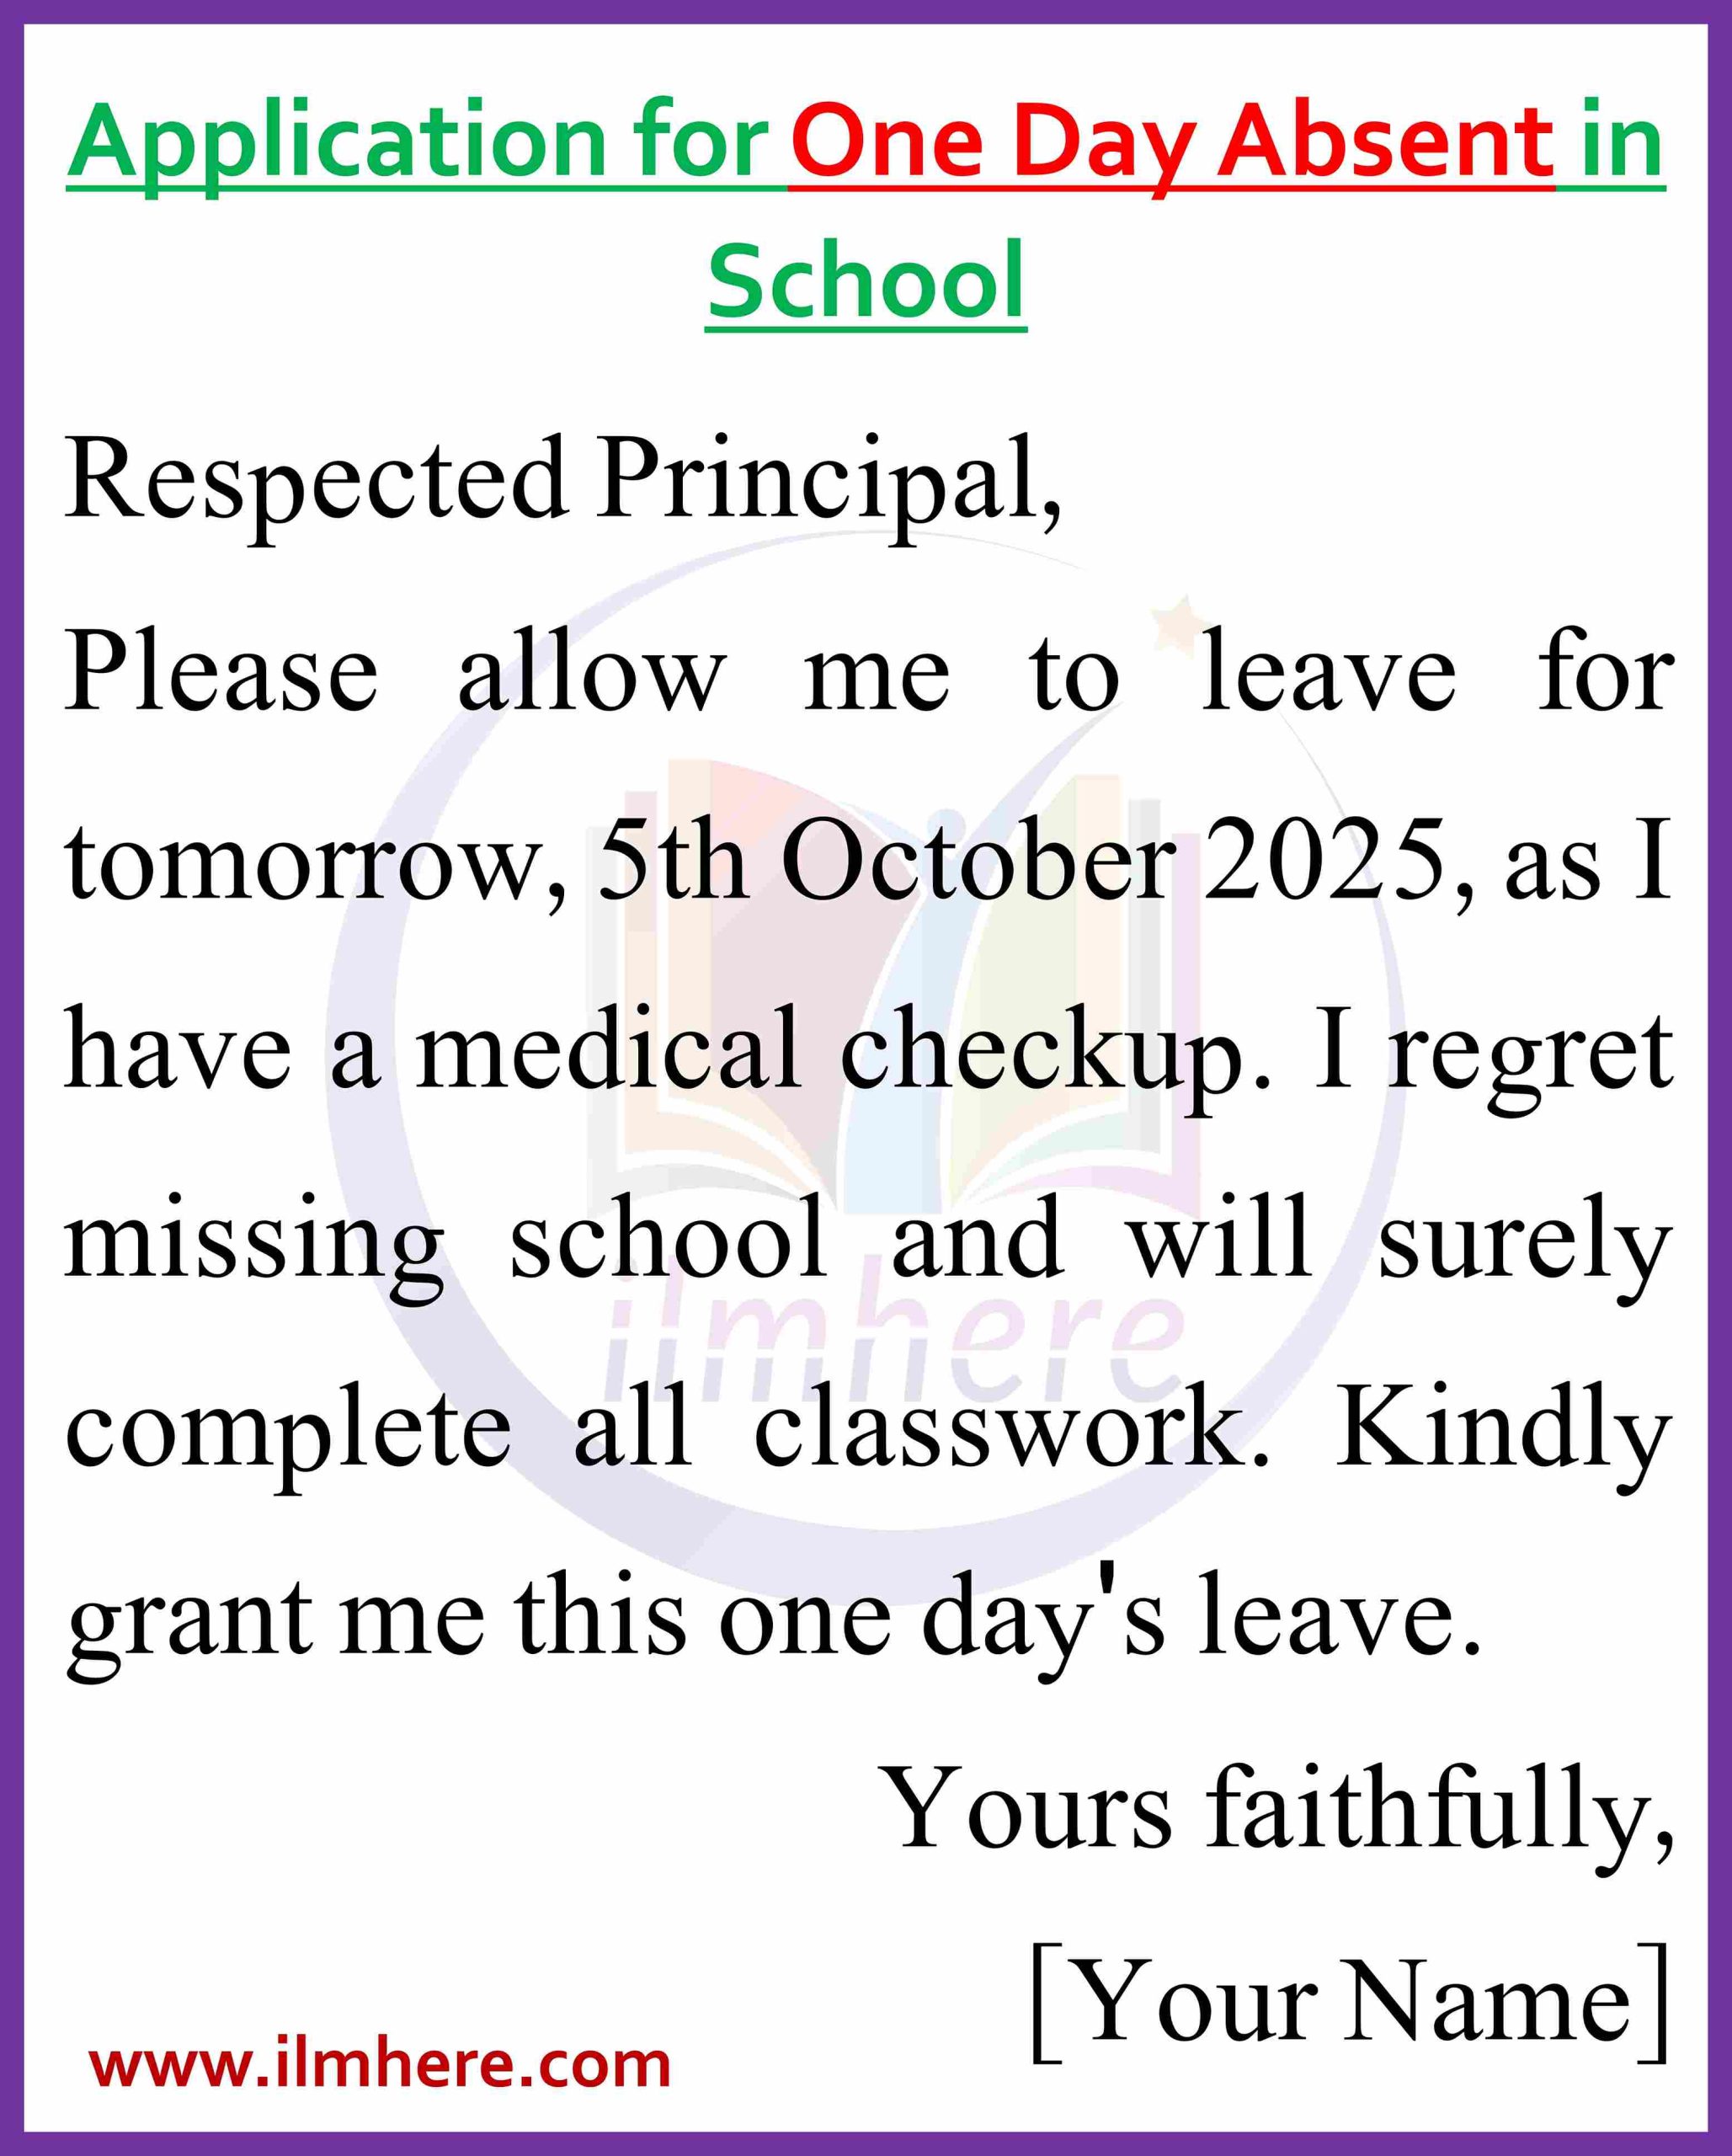 Application for One Day Absent in School